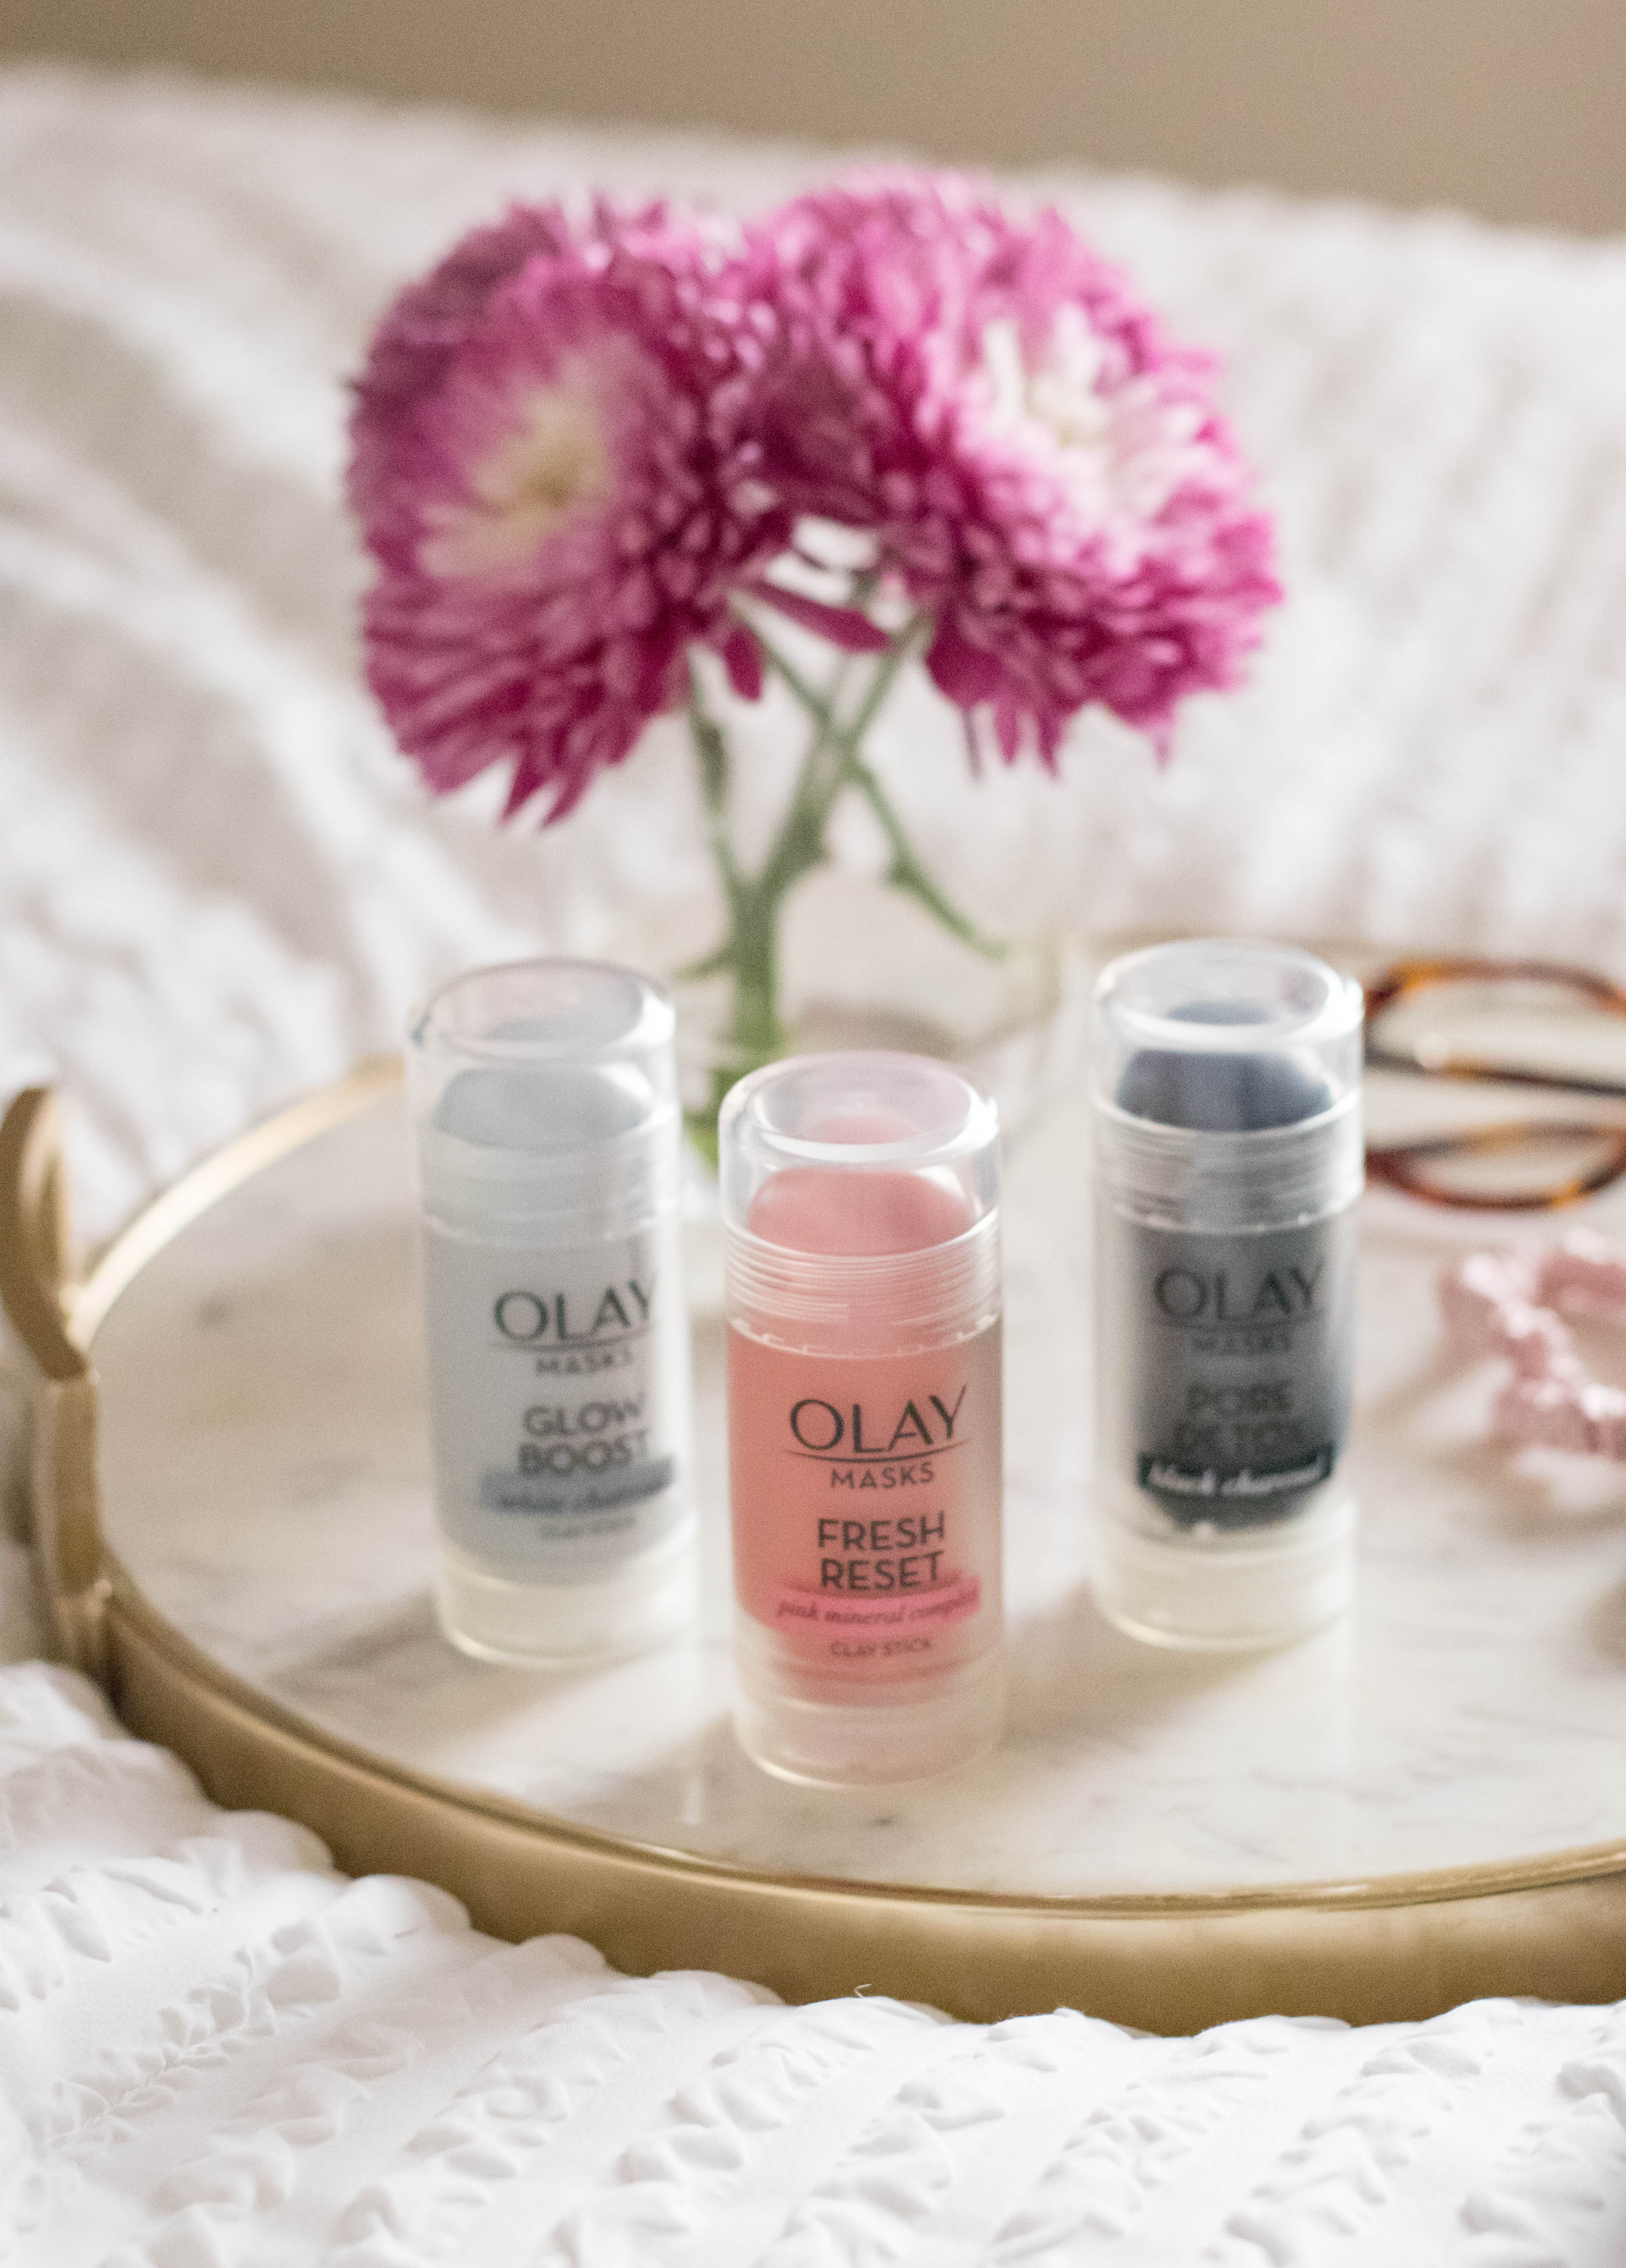 easy ways to incorporate self-care into your daily routine #selfcare #mask #olay